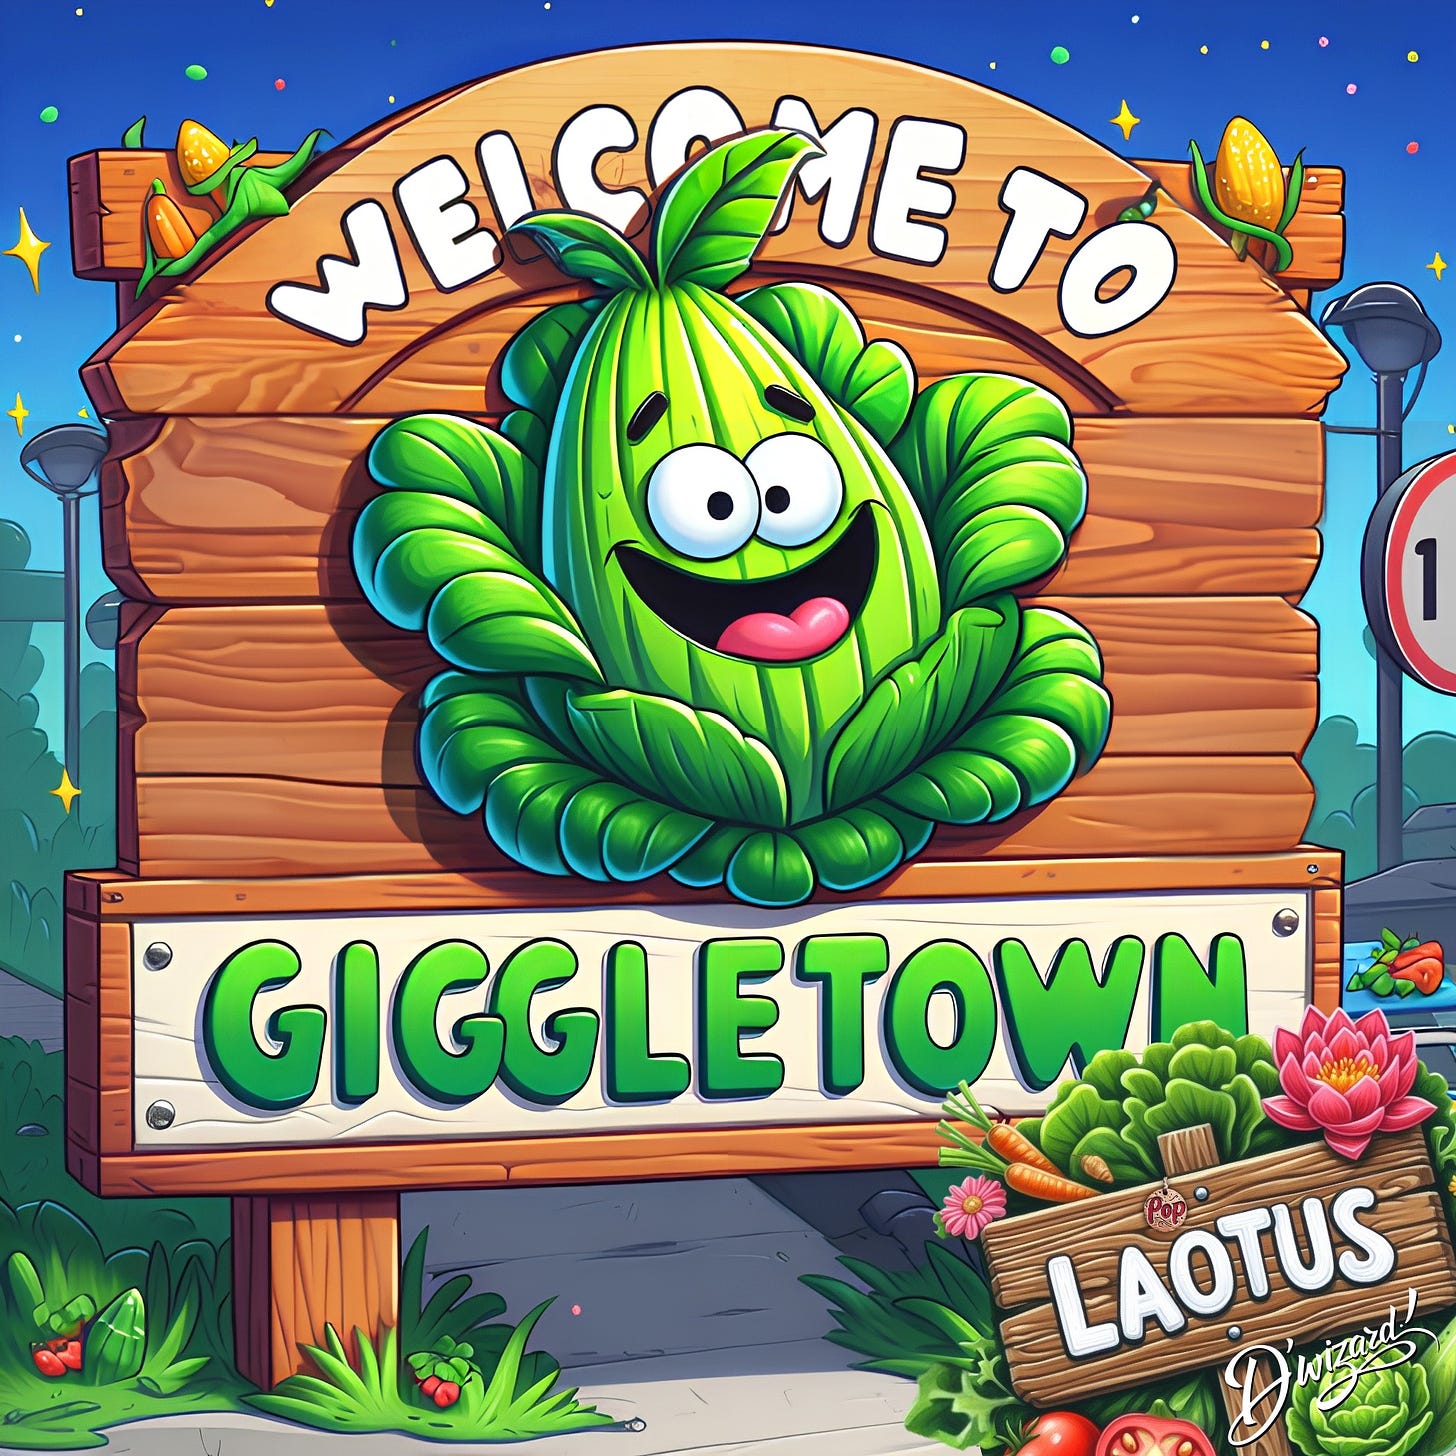 “WELCOME TO GIGGLETOWN - POPULATION LAOTUS!”